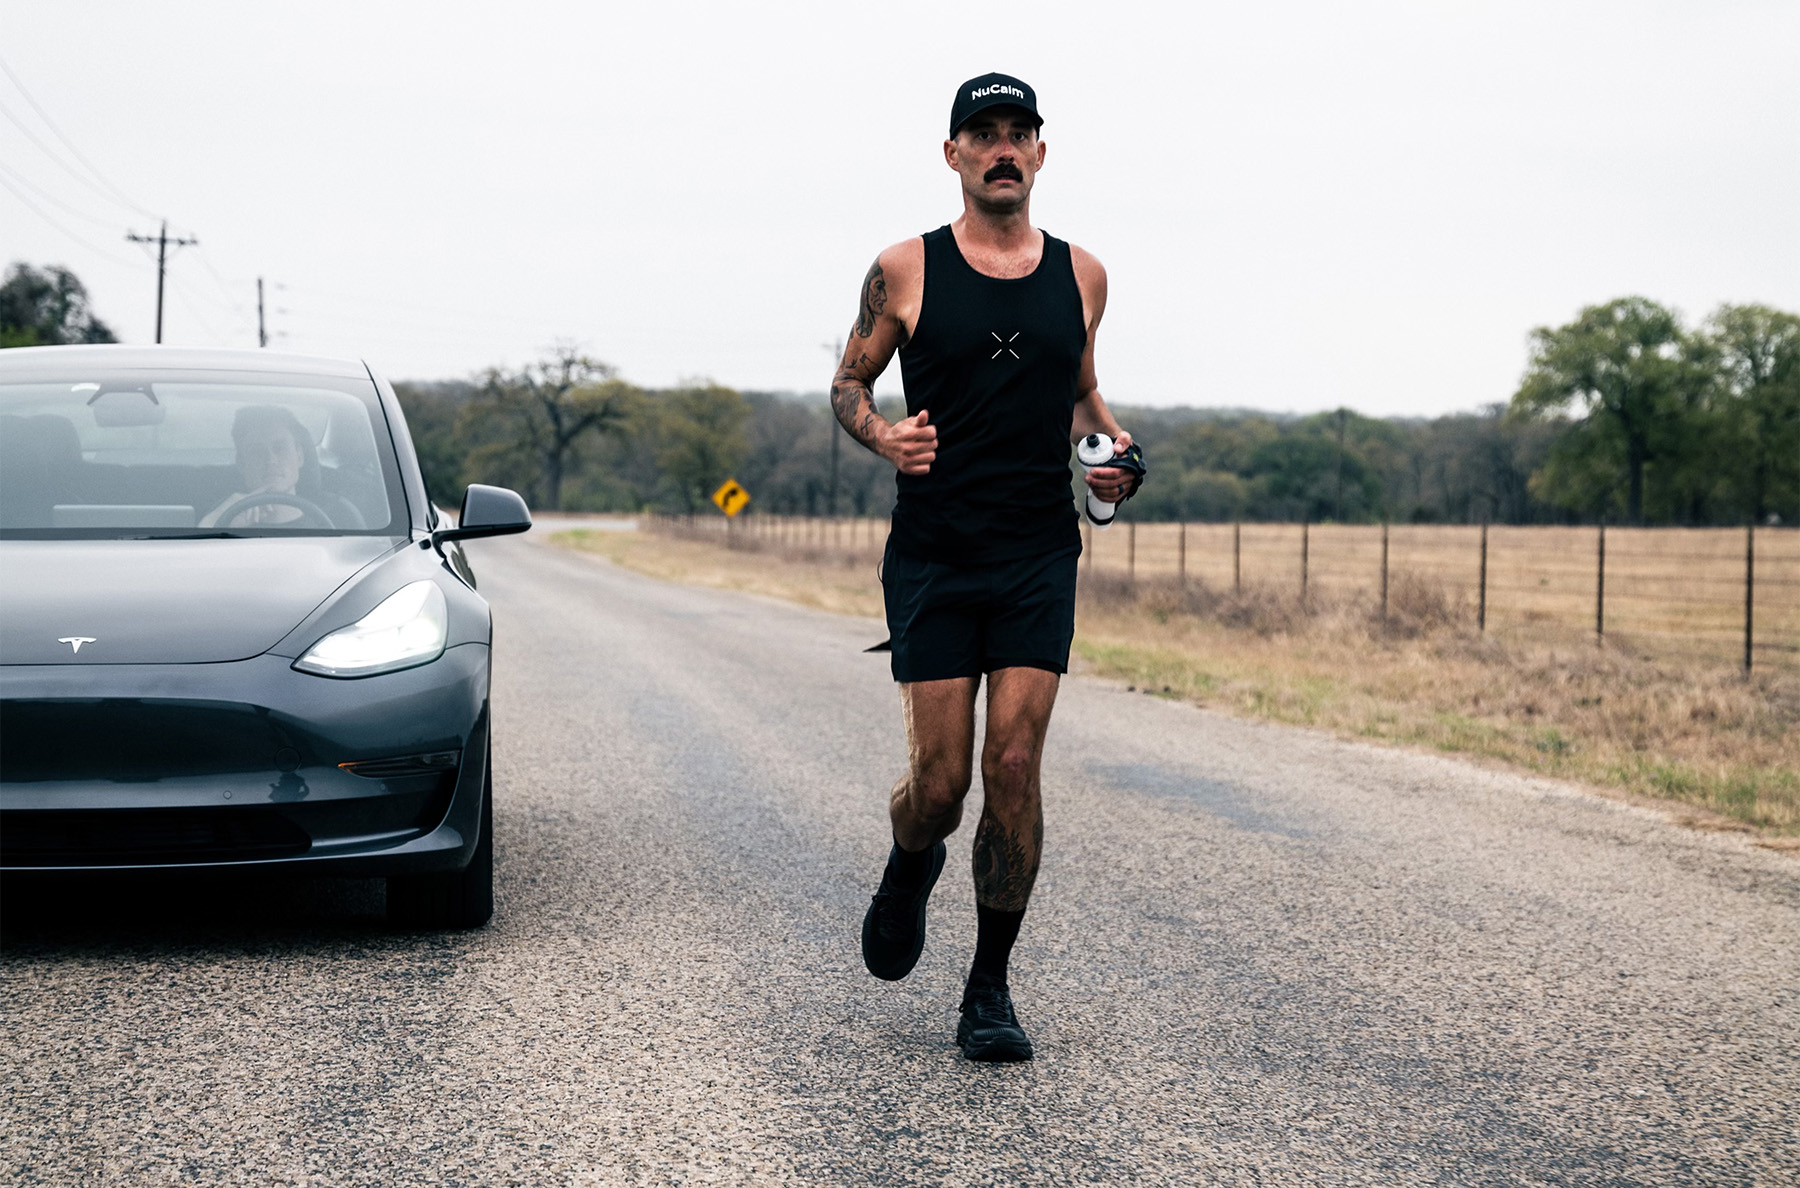 After discovering running in his 30’s, ultra-endurance athlete Robbie Balenger became obsessed with the power of human endurance and quickly found that he needed challenges far exceeding standard ultramarathons to test his limits. So, he started creating his own. Since then, Robbie has run across America, completed the “Colorado Crush,” and recently outran a Tesla. On Off The Couch, we had him on to unpack each of these efforts before asking him about the mental side of endurance, recovery techniques, his next challenge, and much more.